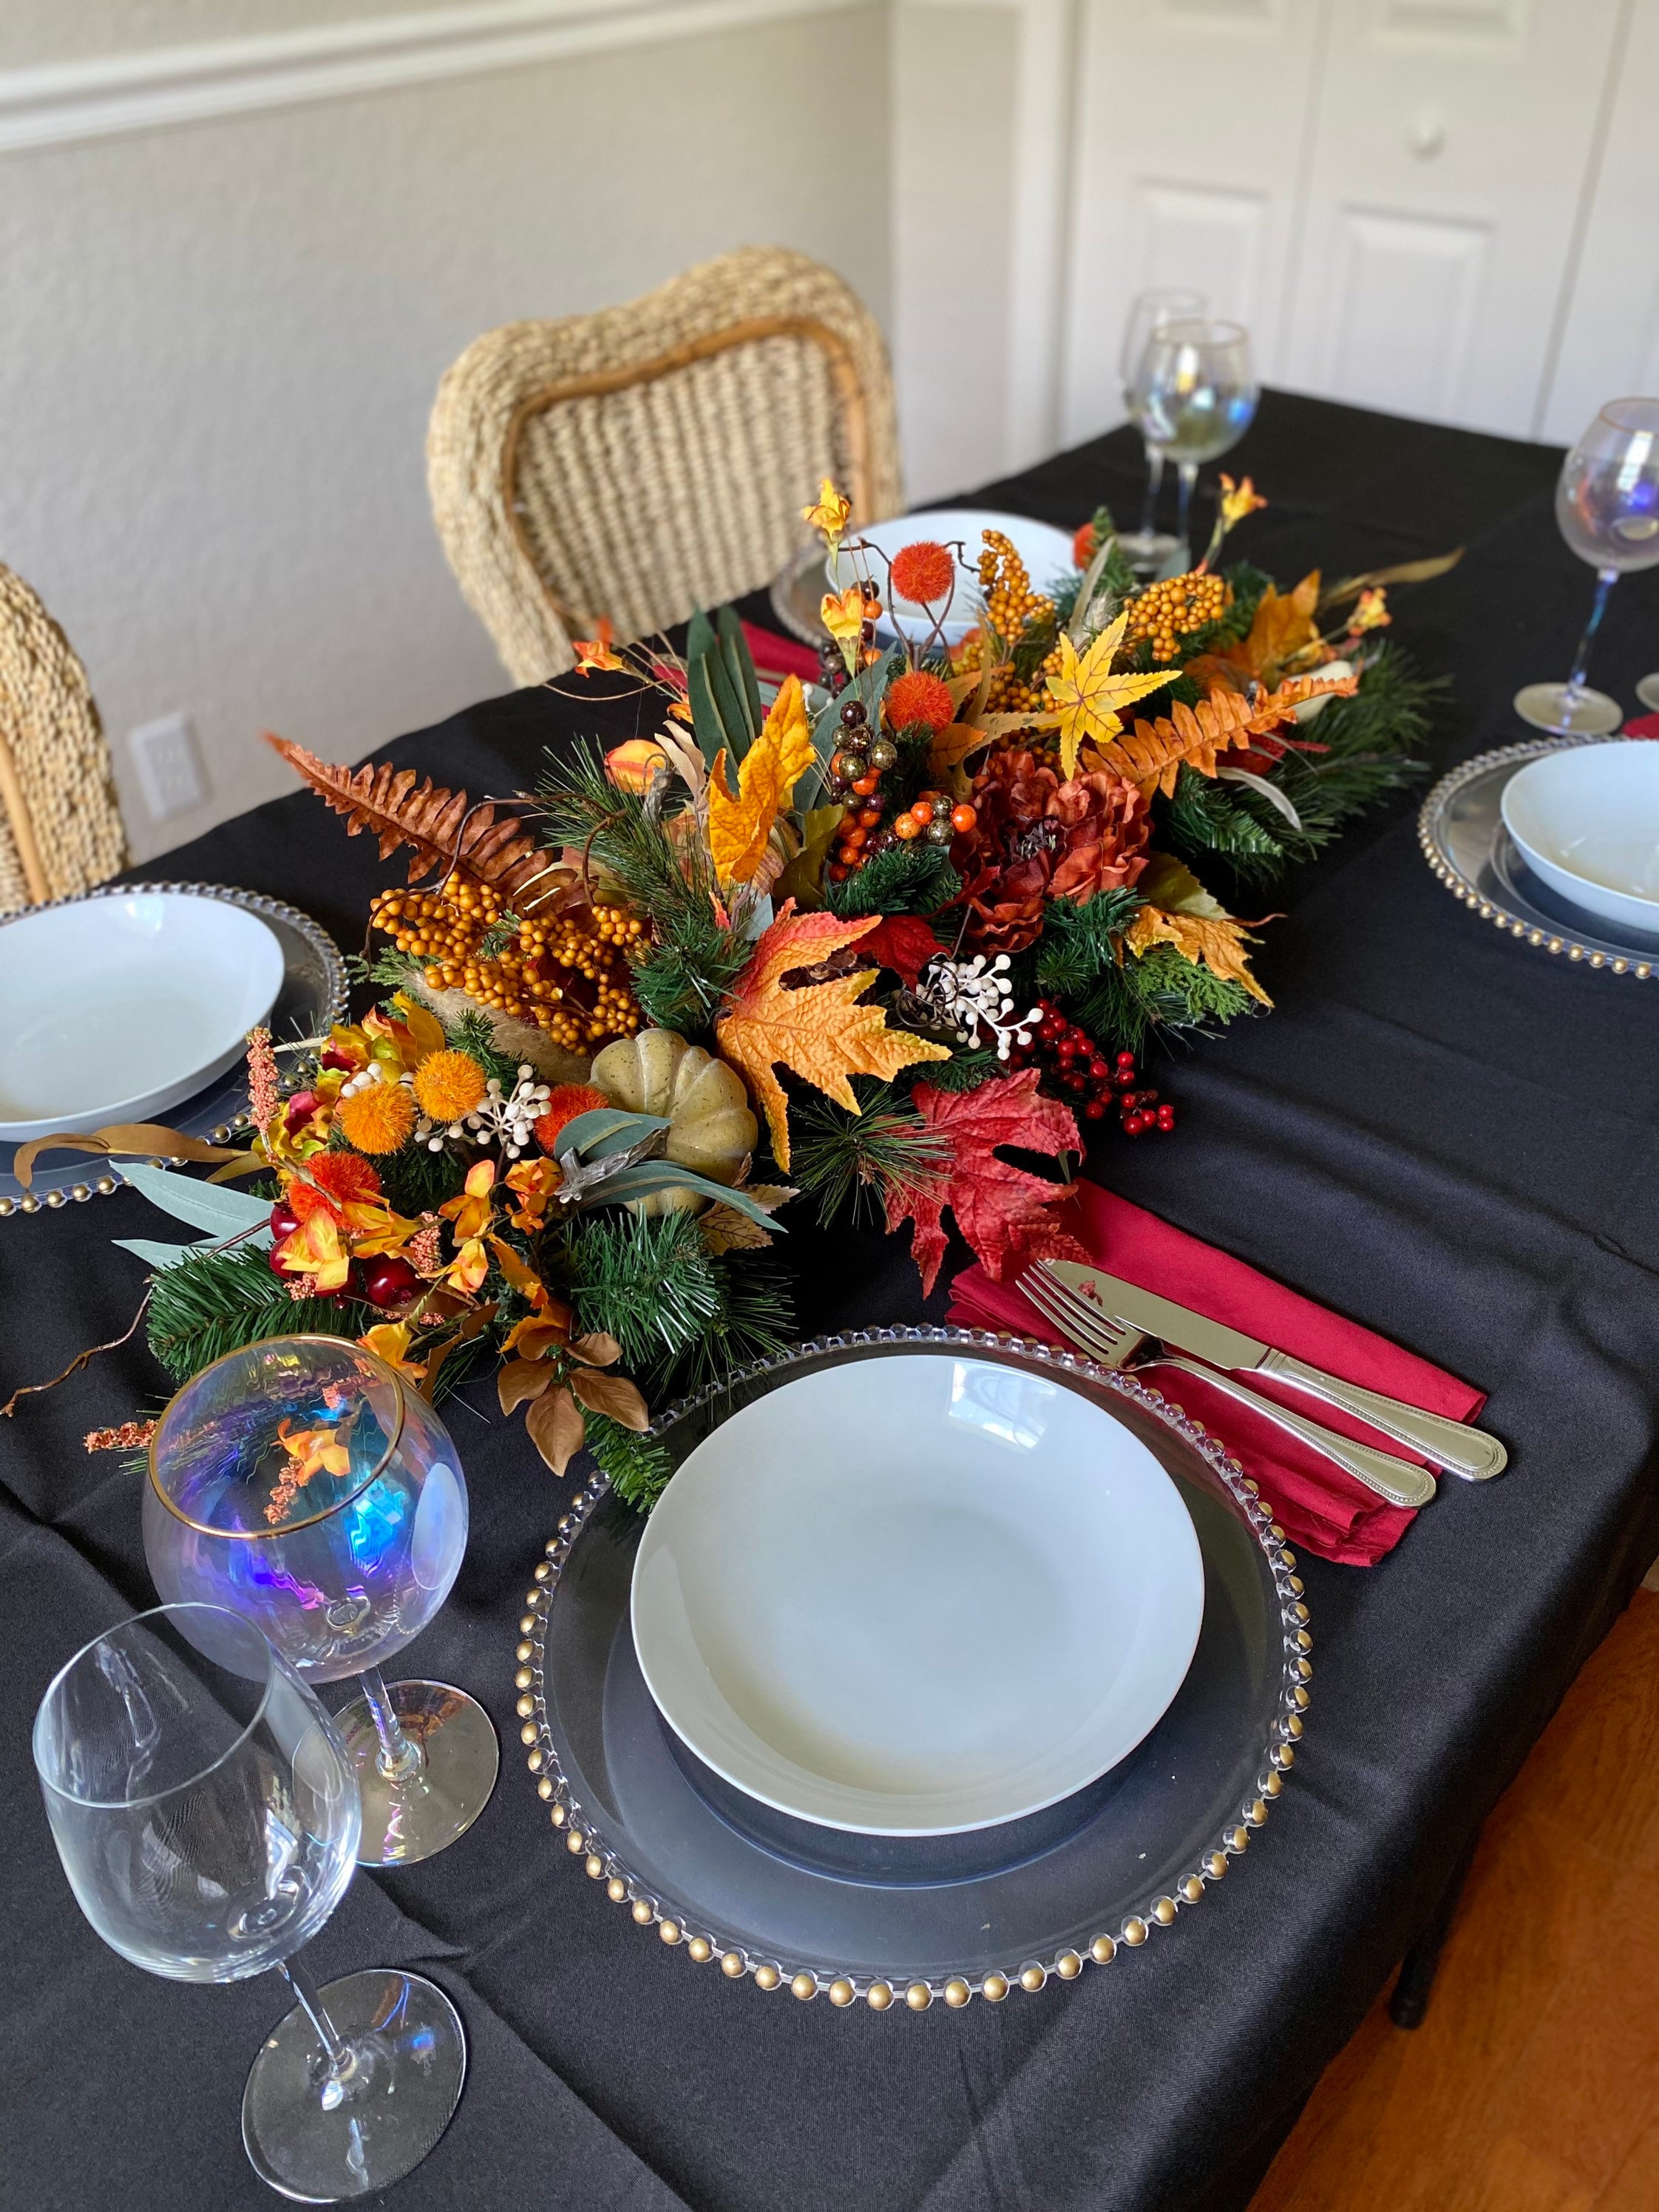 Fall & Thanksgiving Table Runner Bundled with Placemat and Floral Arrangement 